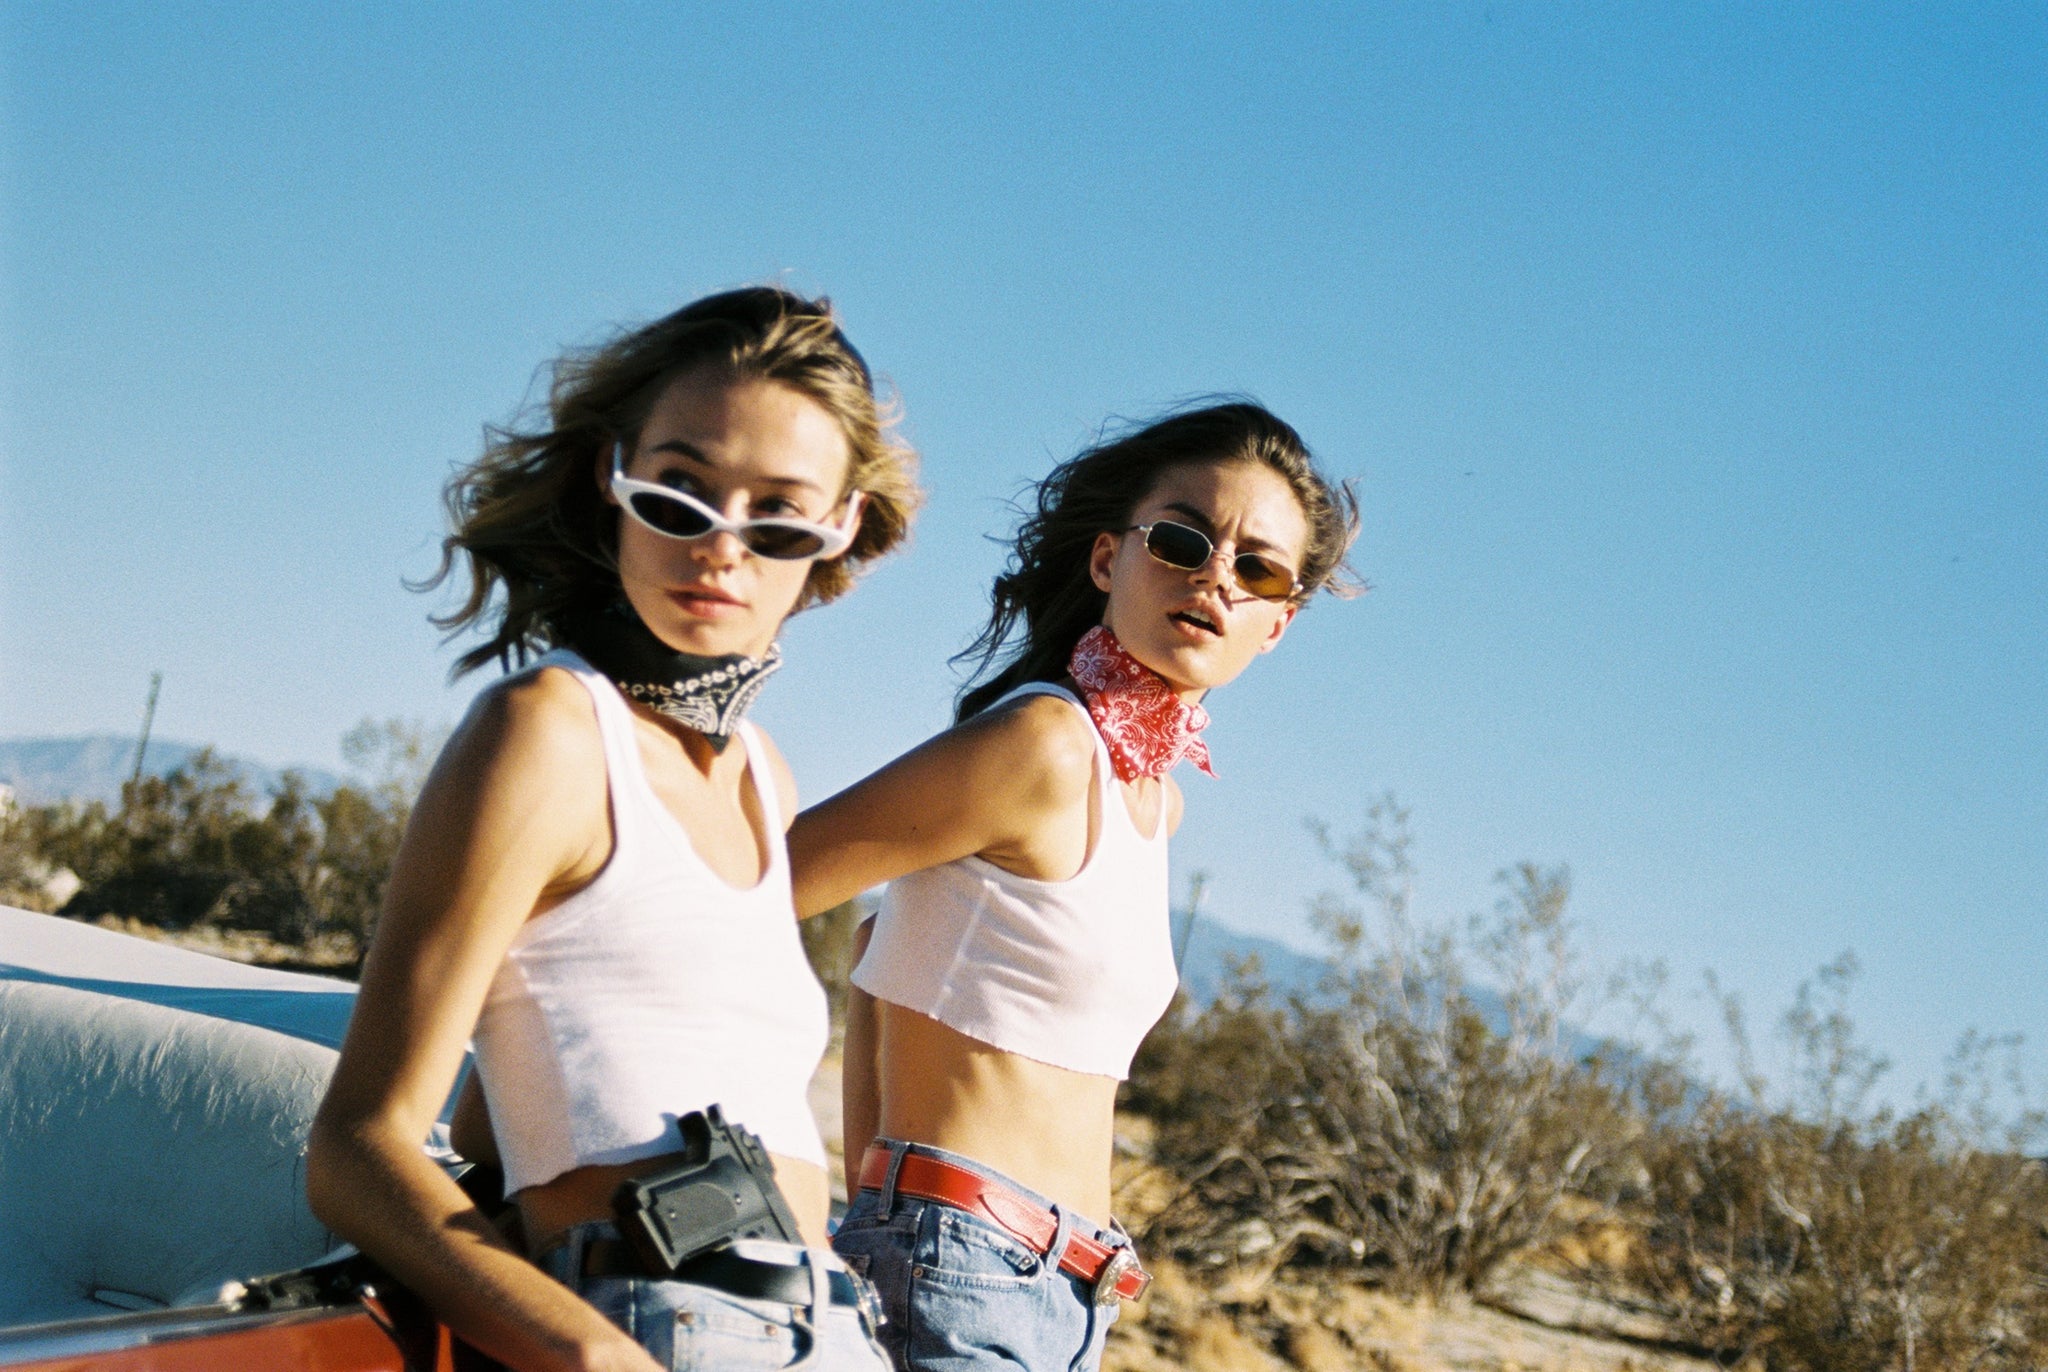 Thelma & Louise - Another Filthy Magazine - Photo 8